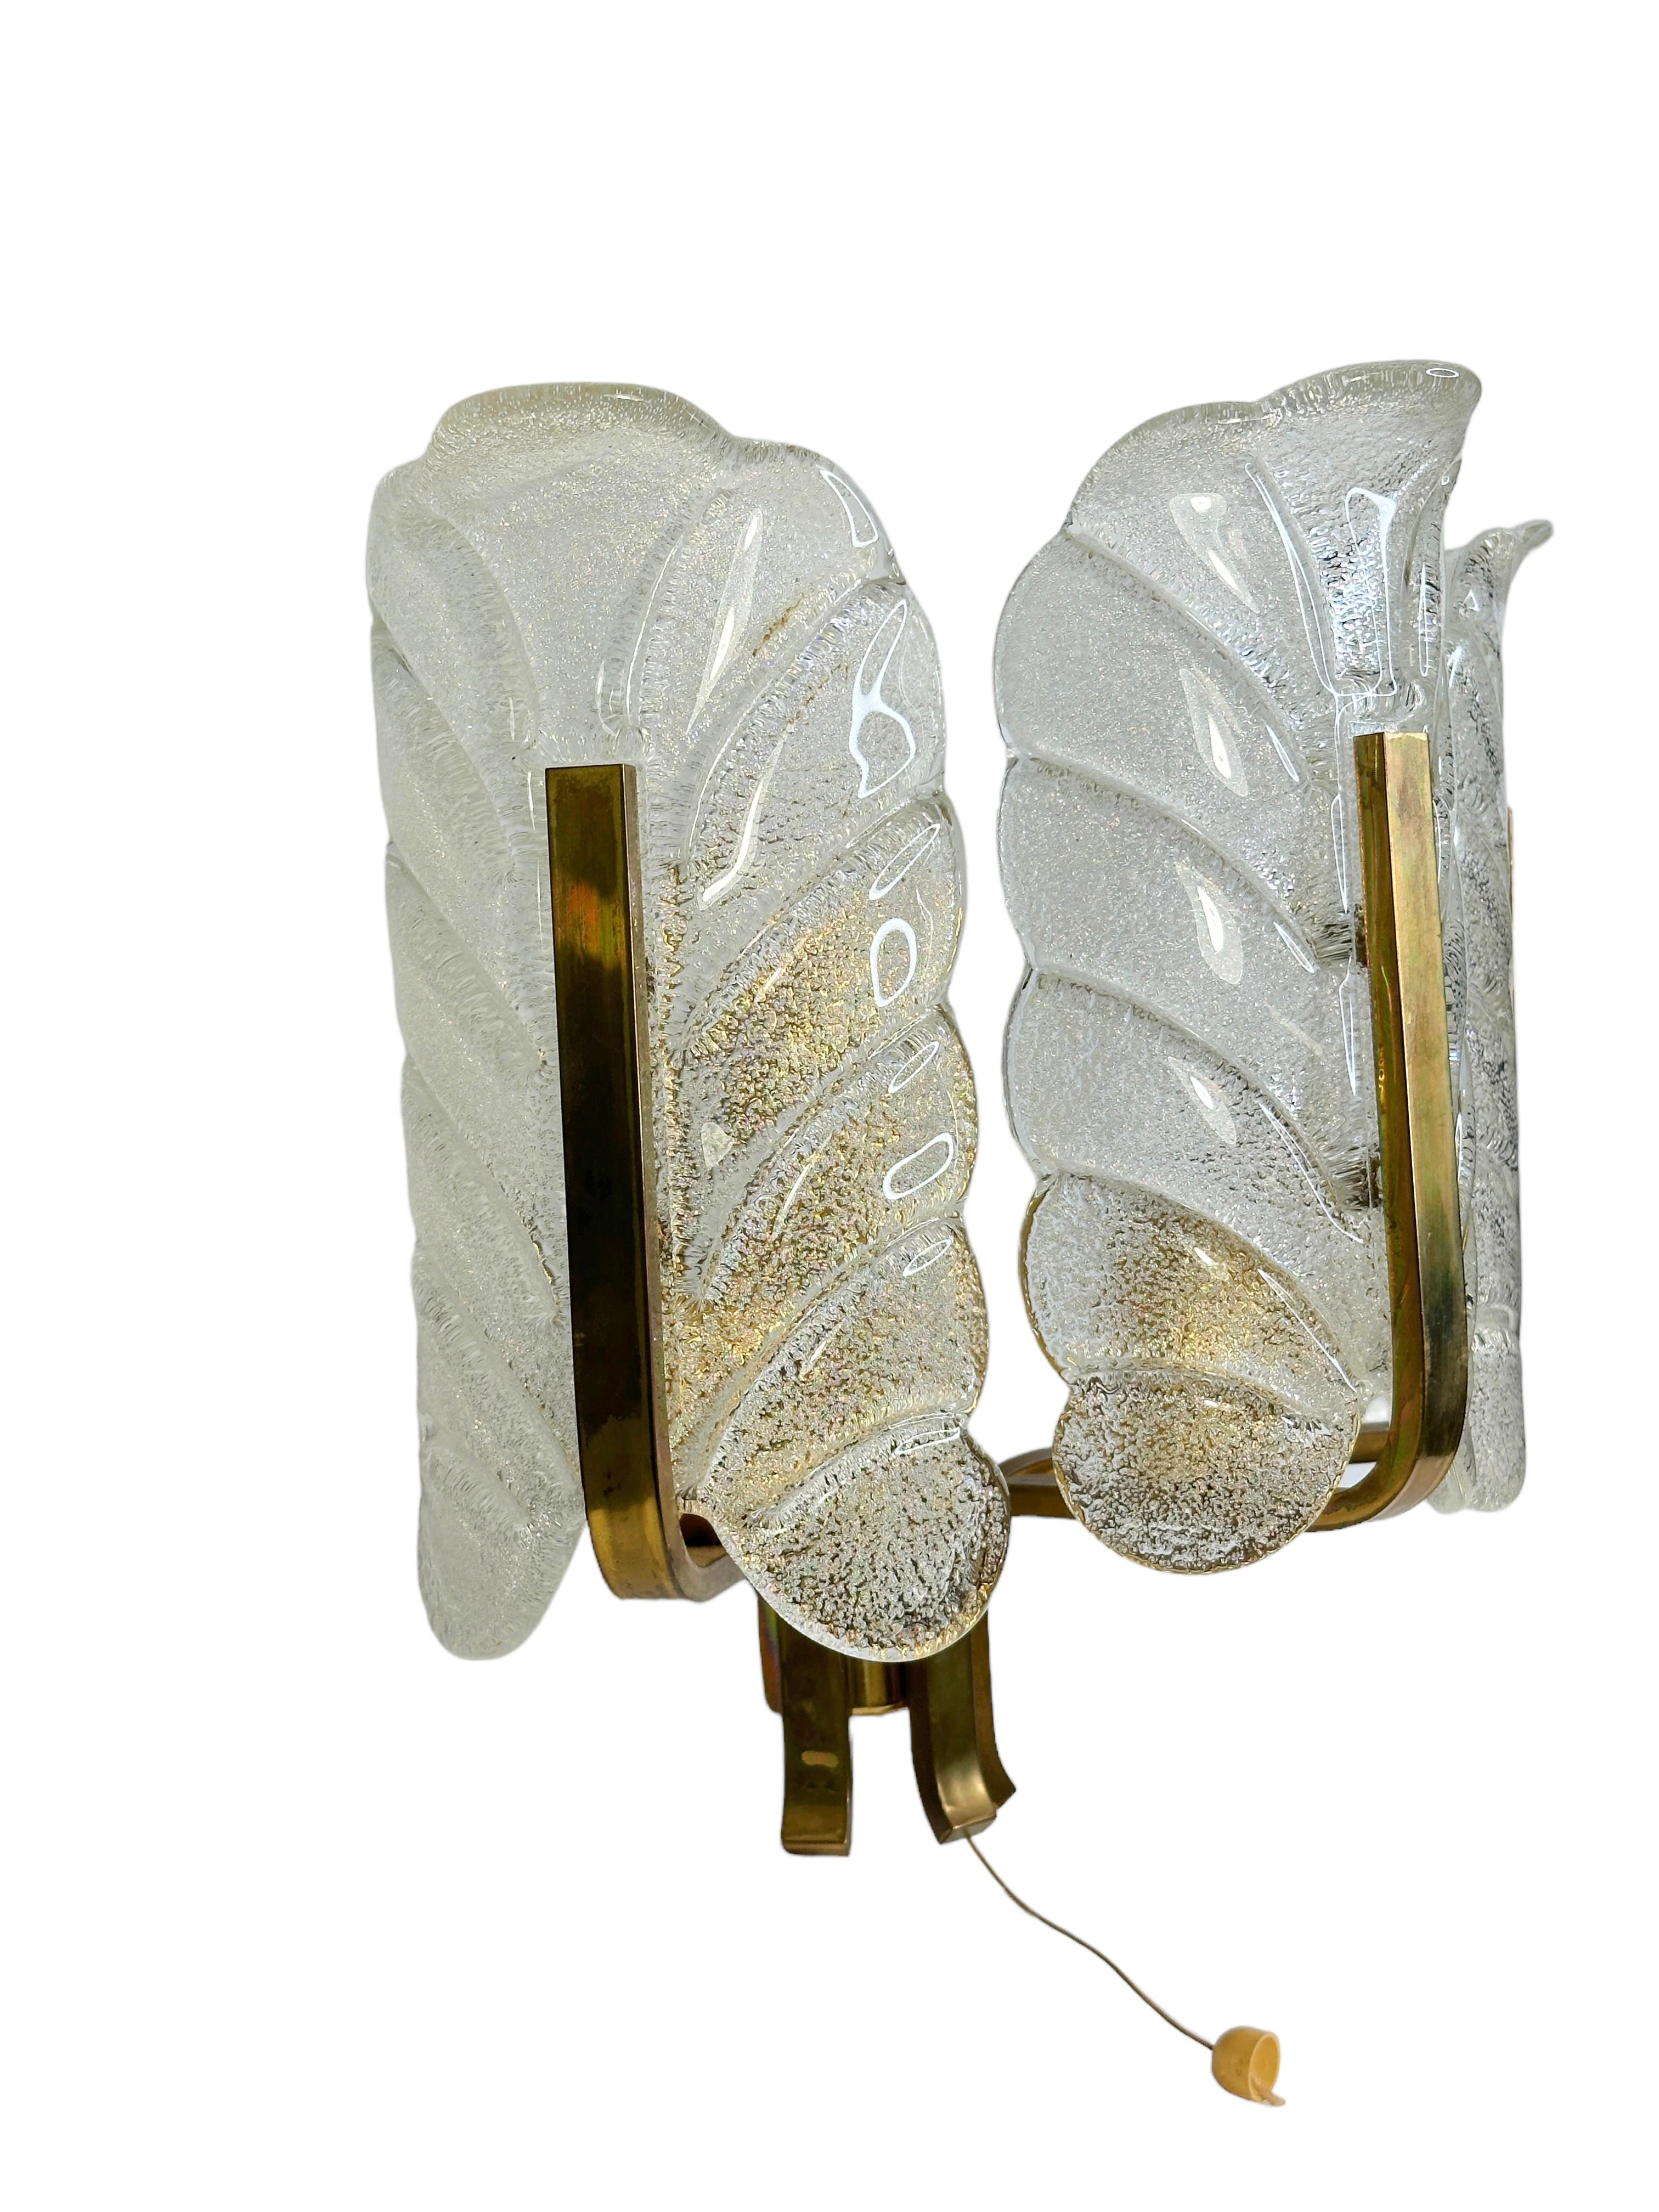 Large glass and brass sconce by Carl Fagerlund for Orrefors. This large brass wall light consists of two arms has two light sources. Each arm contains a Murano frosted glass acanthus leaf shade. Offered midcentury light has original wire.
Found at